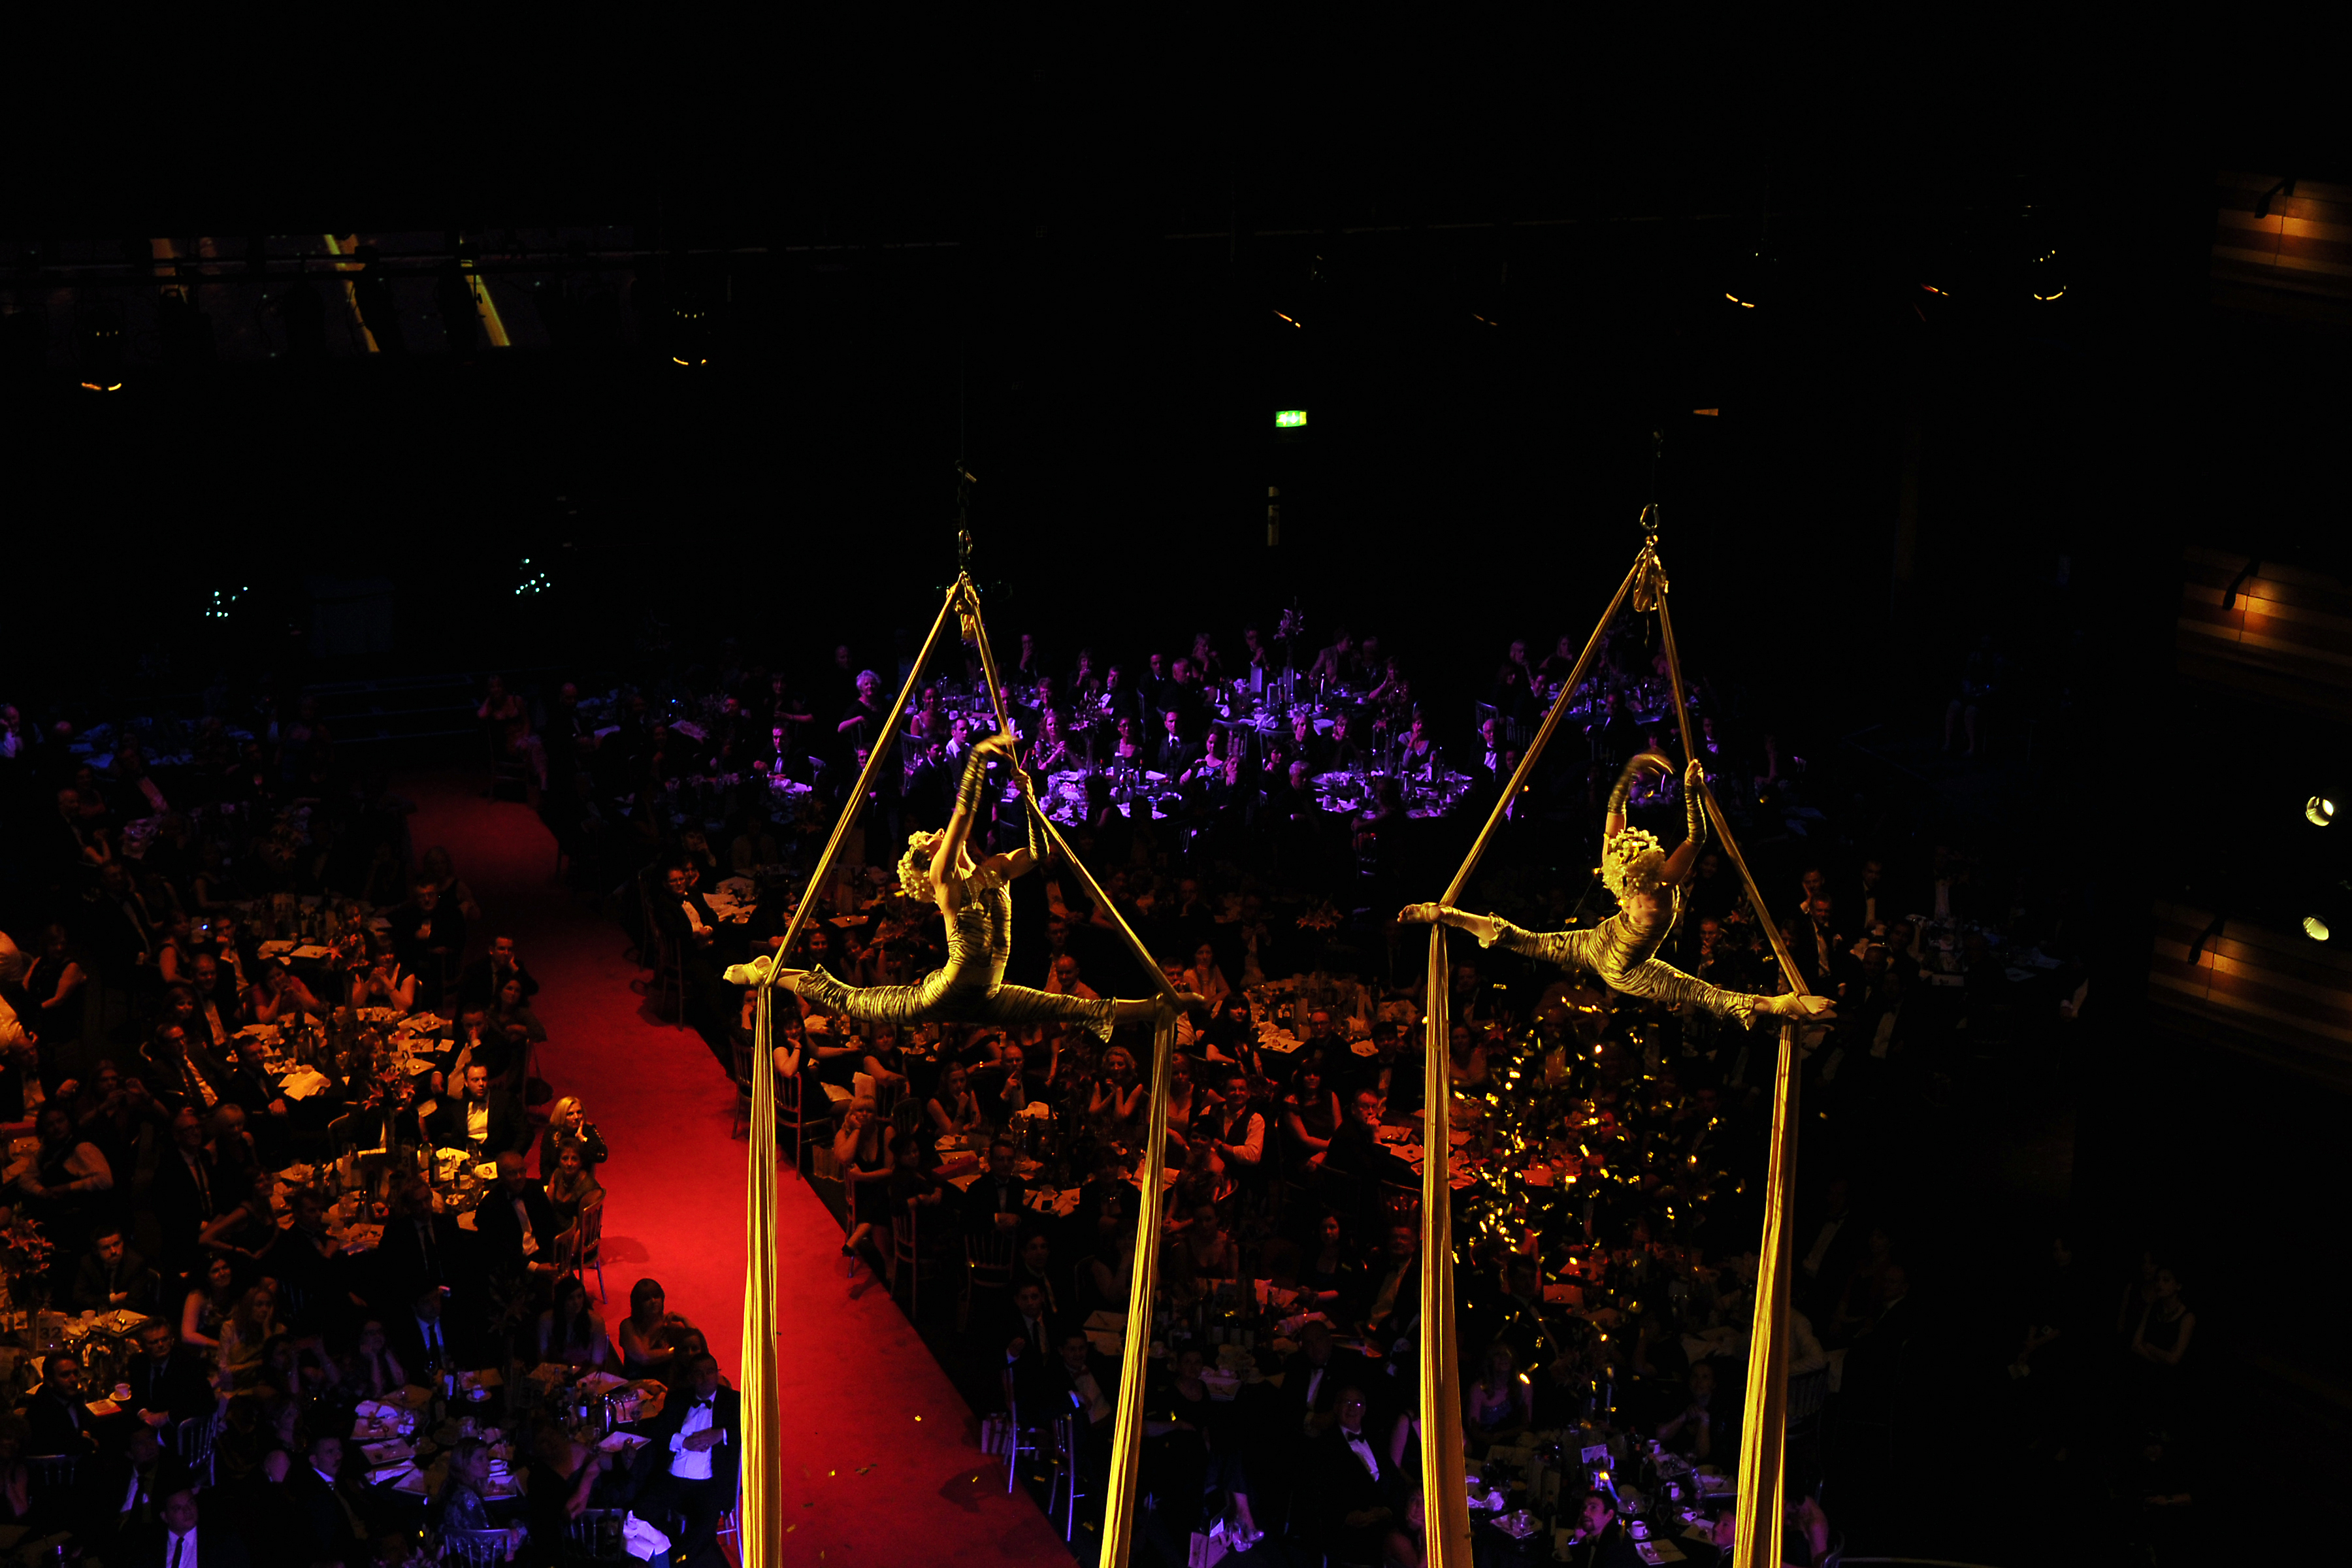 Gold Dust performing an aerial act on gold silks at the Arts & Business Cymru Awards at Wales Millennium Centre 